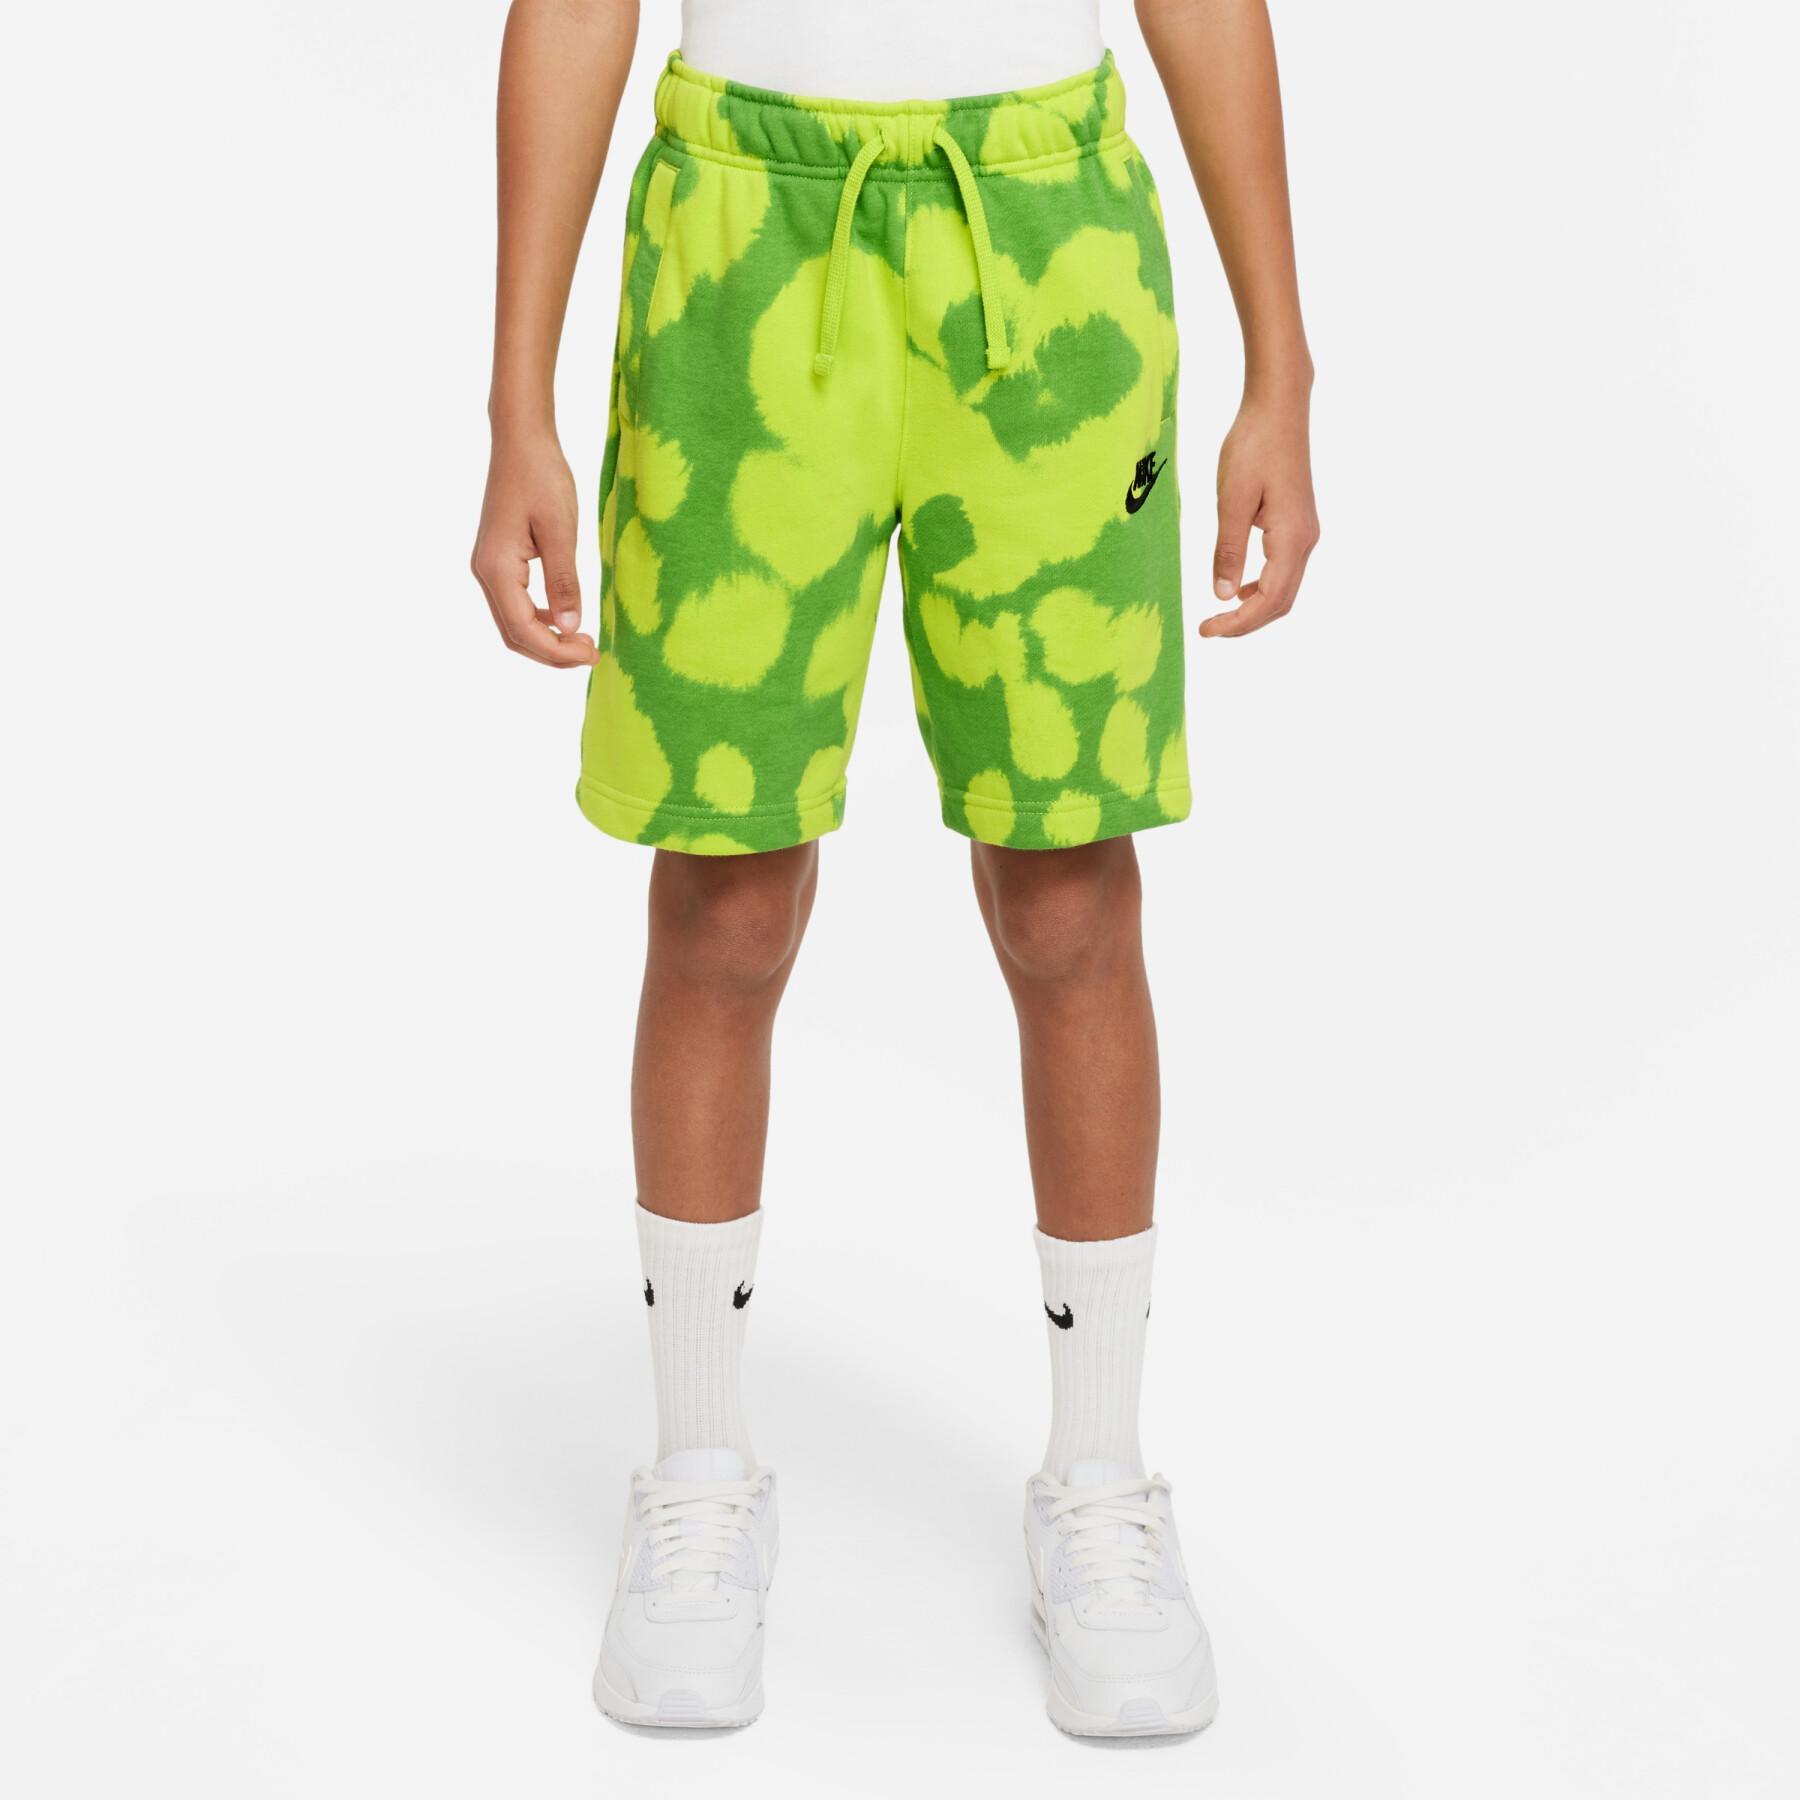 Children's shorts Nike Connect